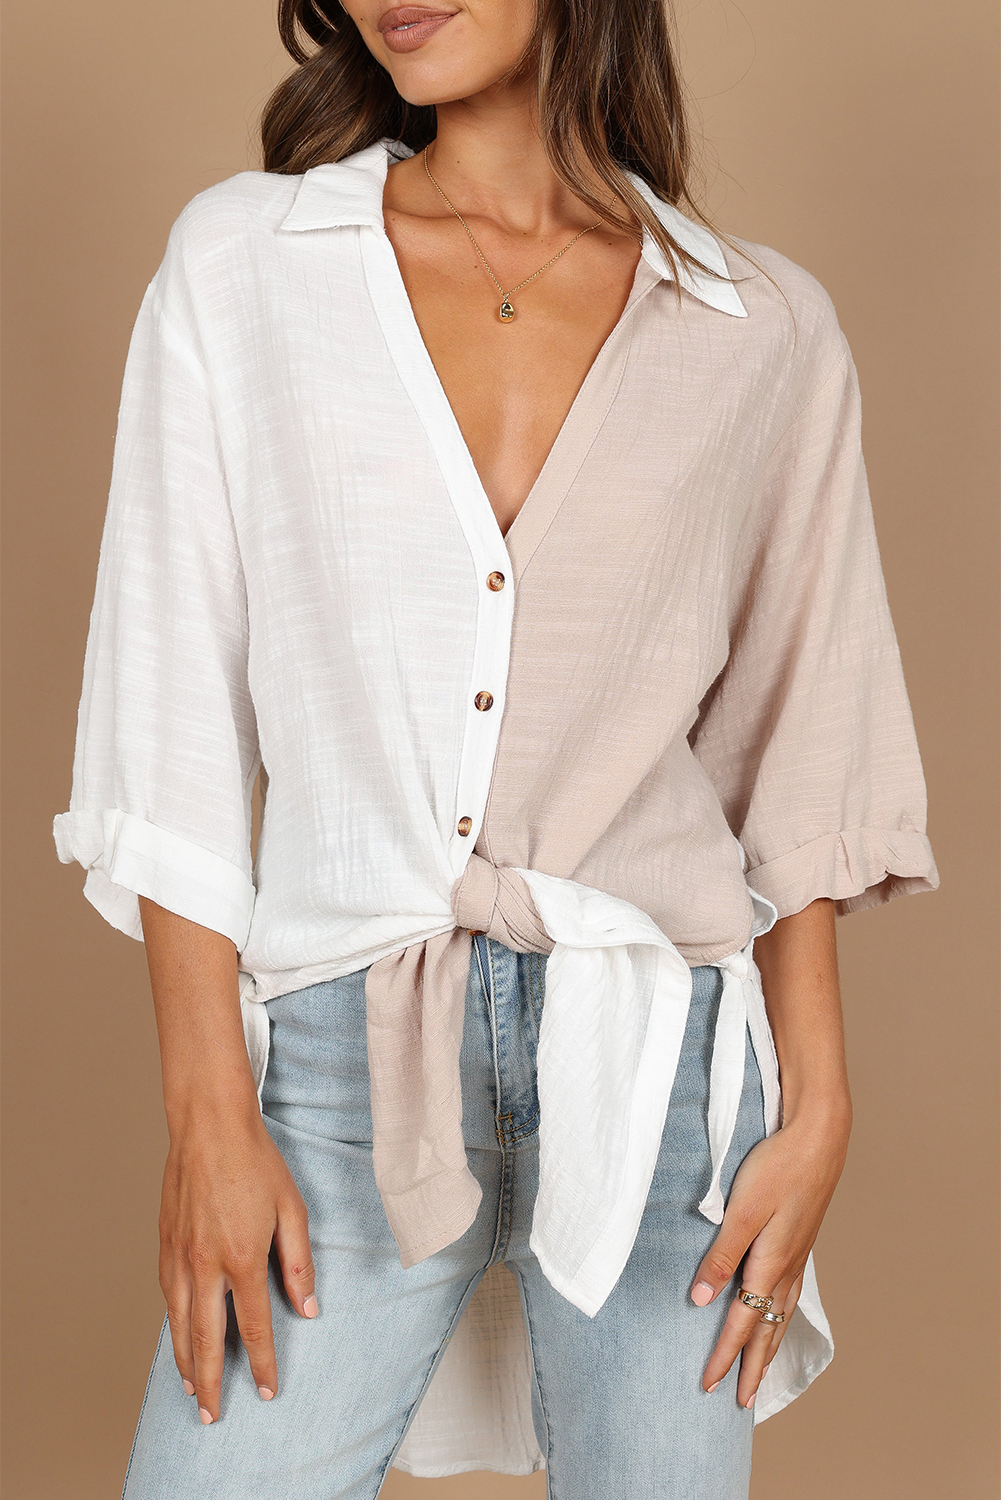 Shewin Wholesale New arrival White Colorblock V Neck Collared Side Slits SHIRT